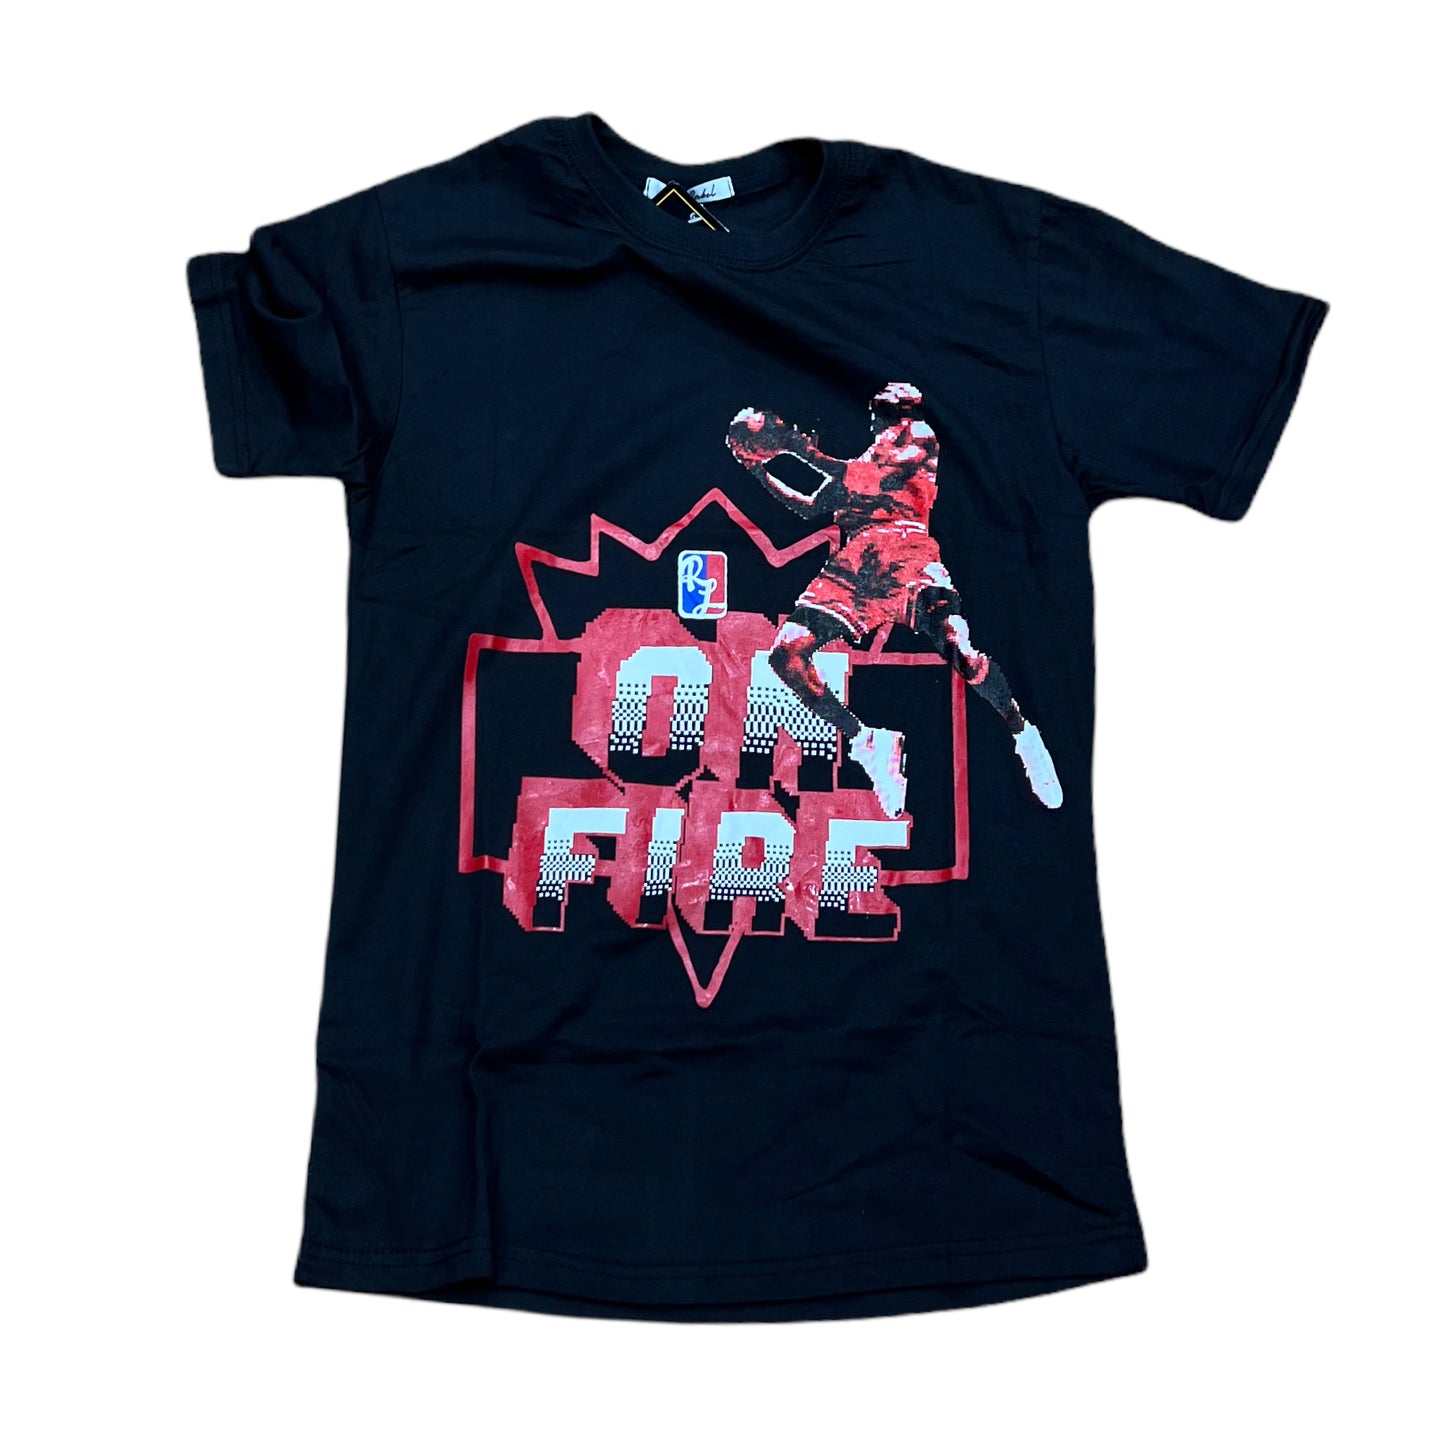 RETRO LABEL: 4'S Thunder On Fire SS Tee